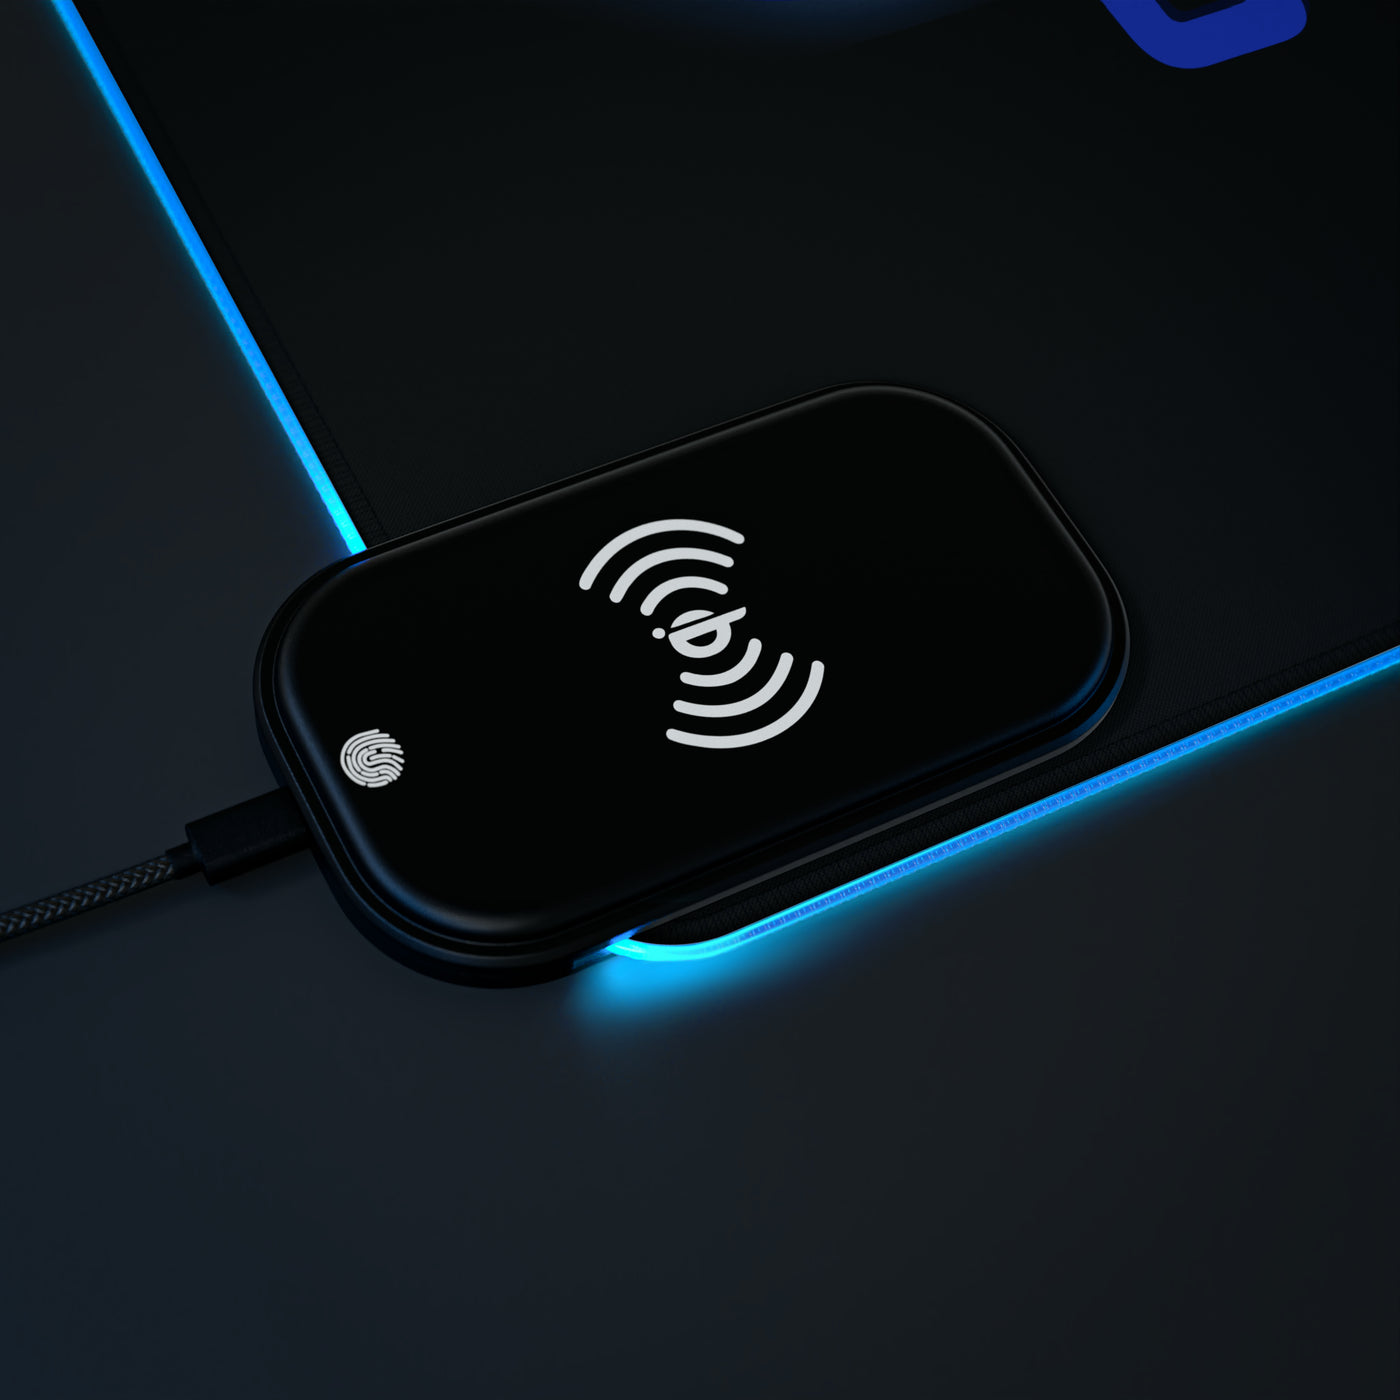 GAME ON LED Gaming Mouse Pad, Wireless Charging